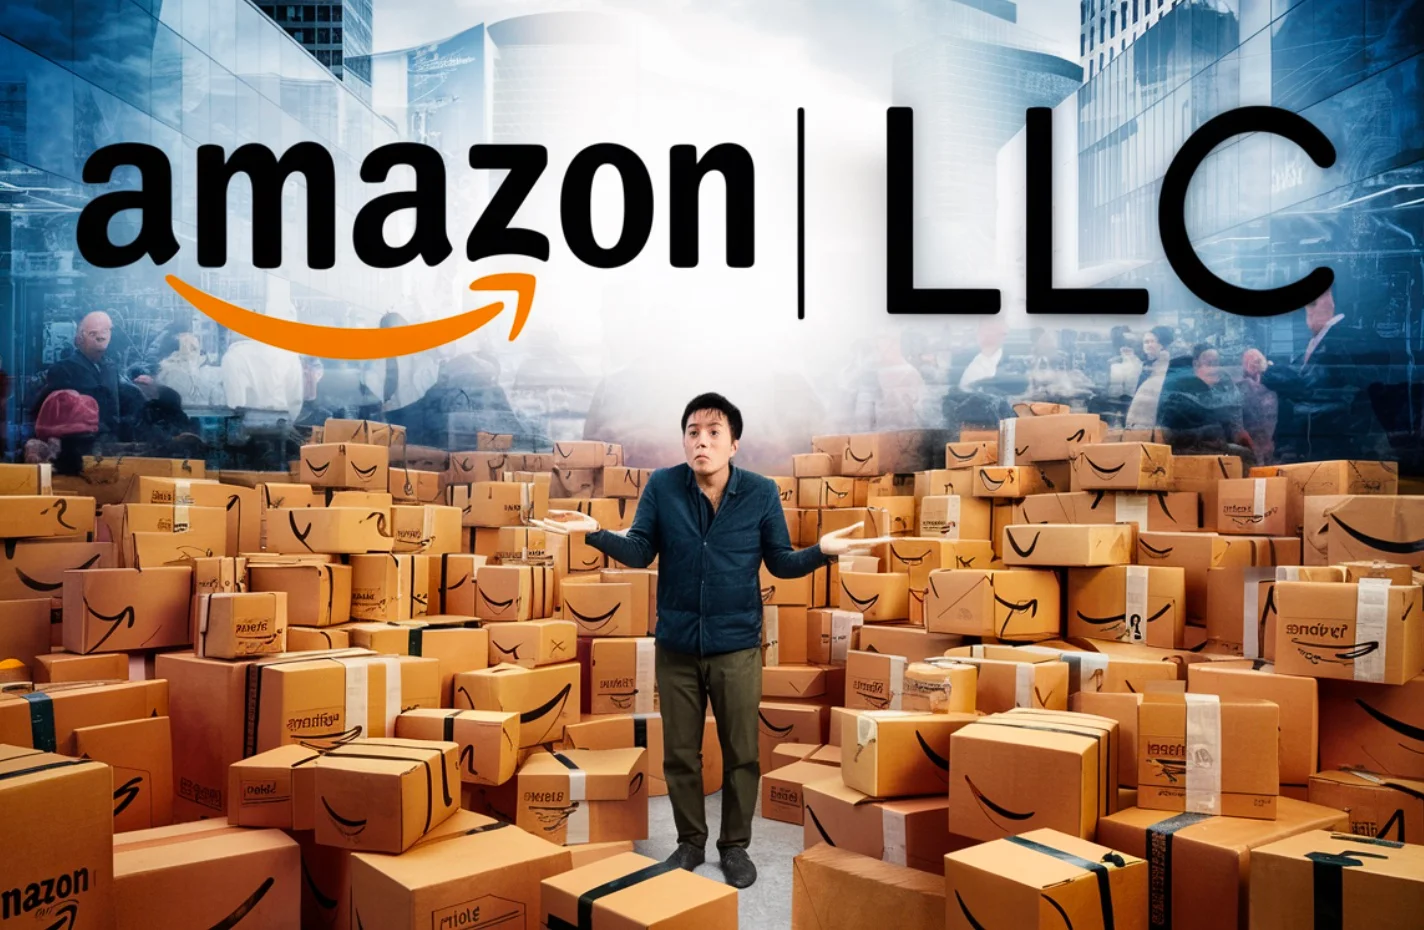 Do you need an LLC to sell on Amazon